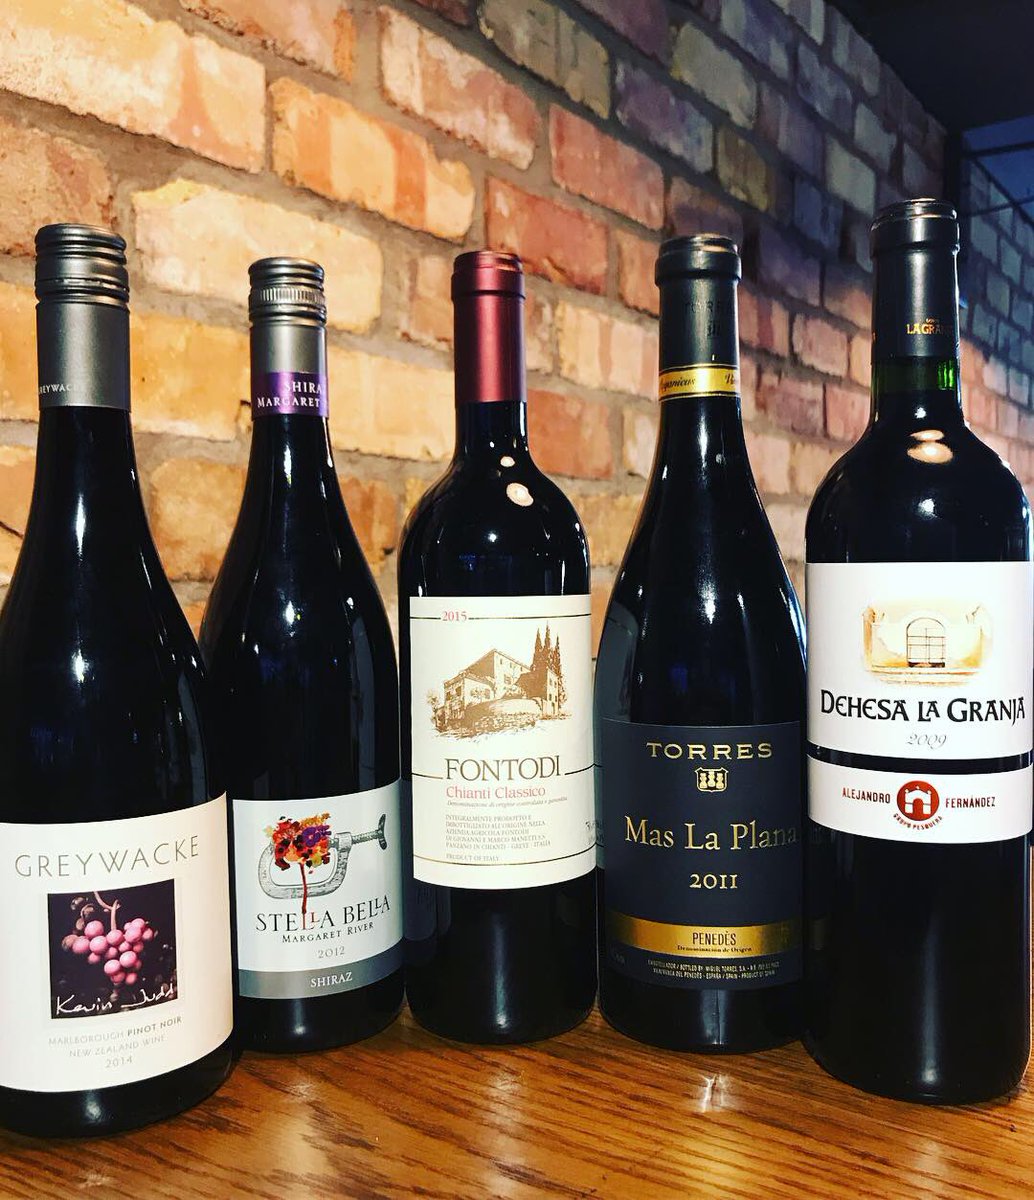 A tease of some of the whites and reds hitting our enomatic machines for the weekend! Come taste these while you can...
#thesipster 
#greywacke #grosset #eberle #fontodi #maslaplana #stellabella  #enomatic #winetasting